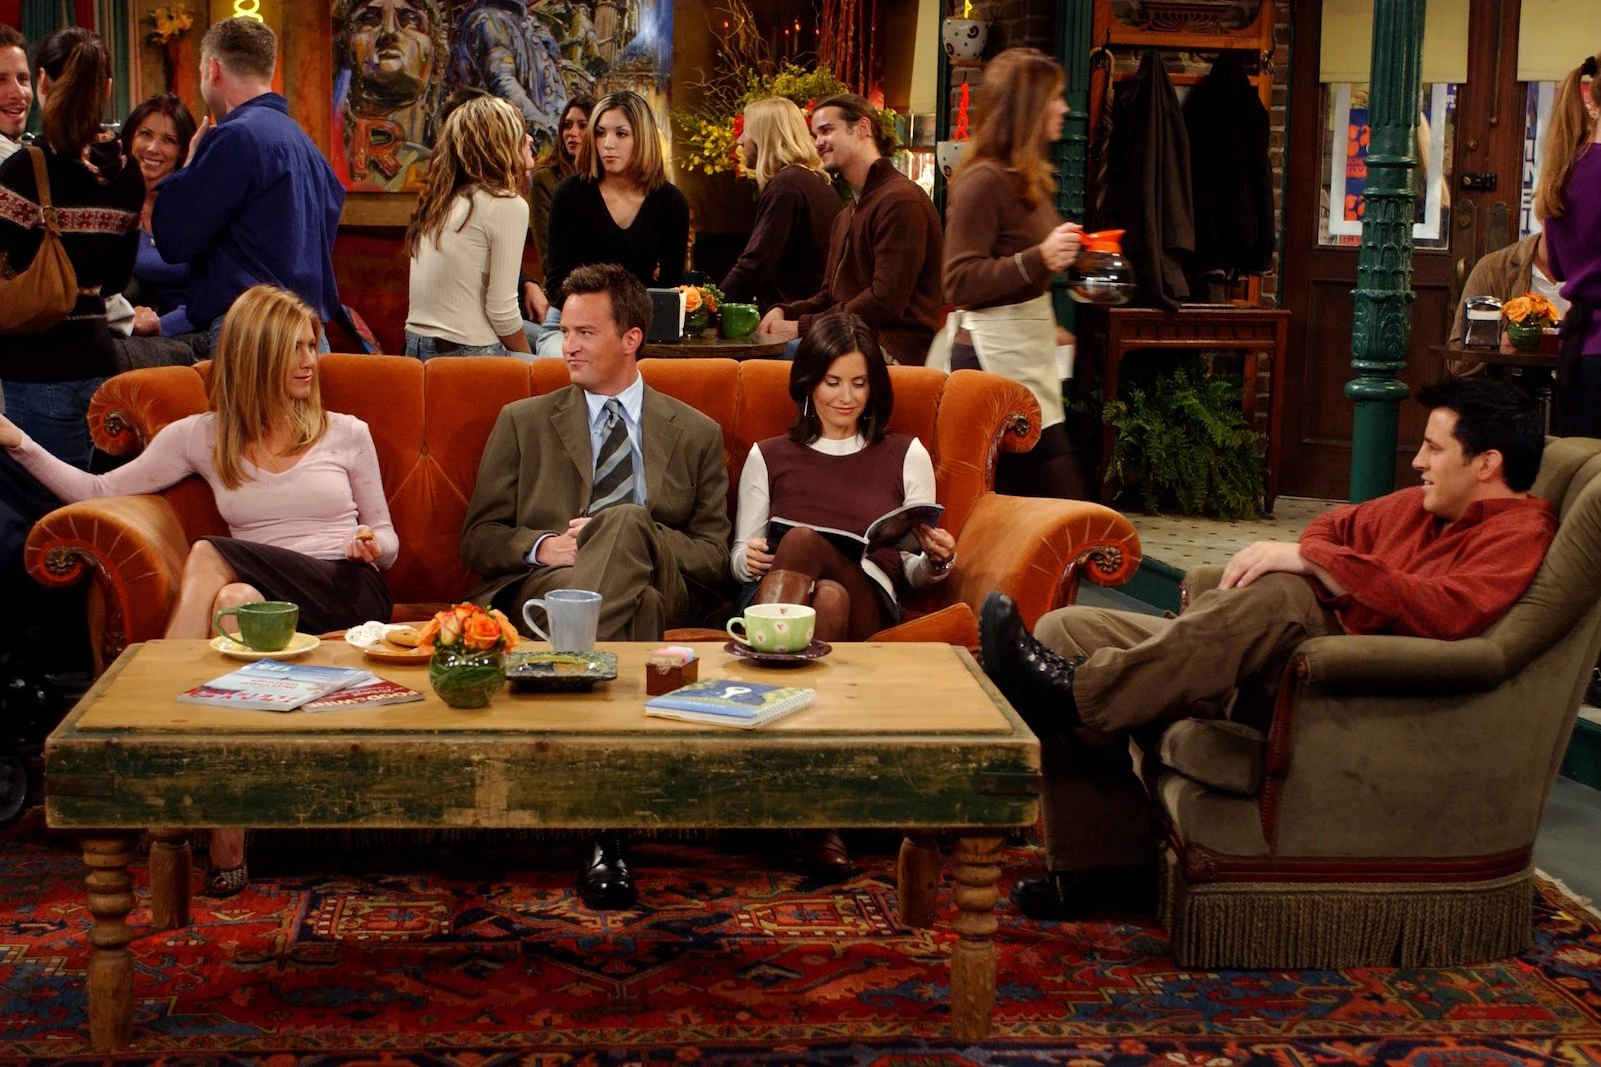 A 25th Anniversary Friends Pop-Up Will Let You Visit Central Perk